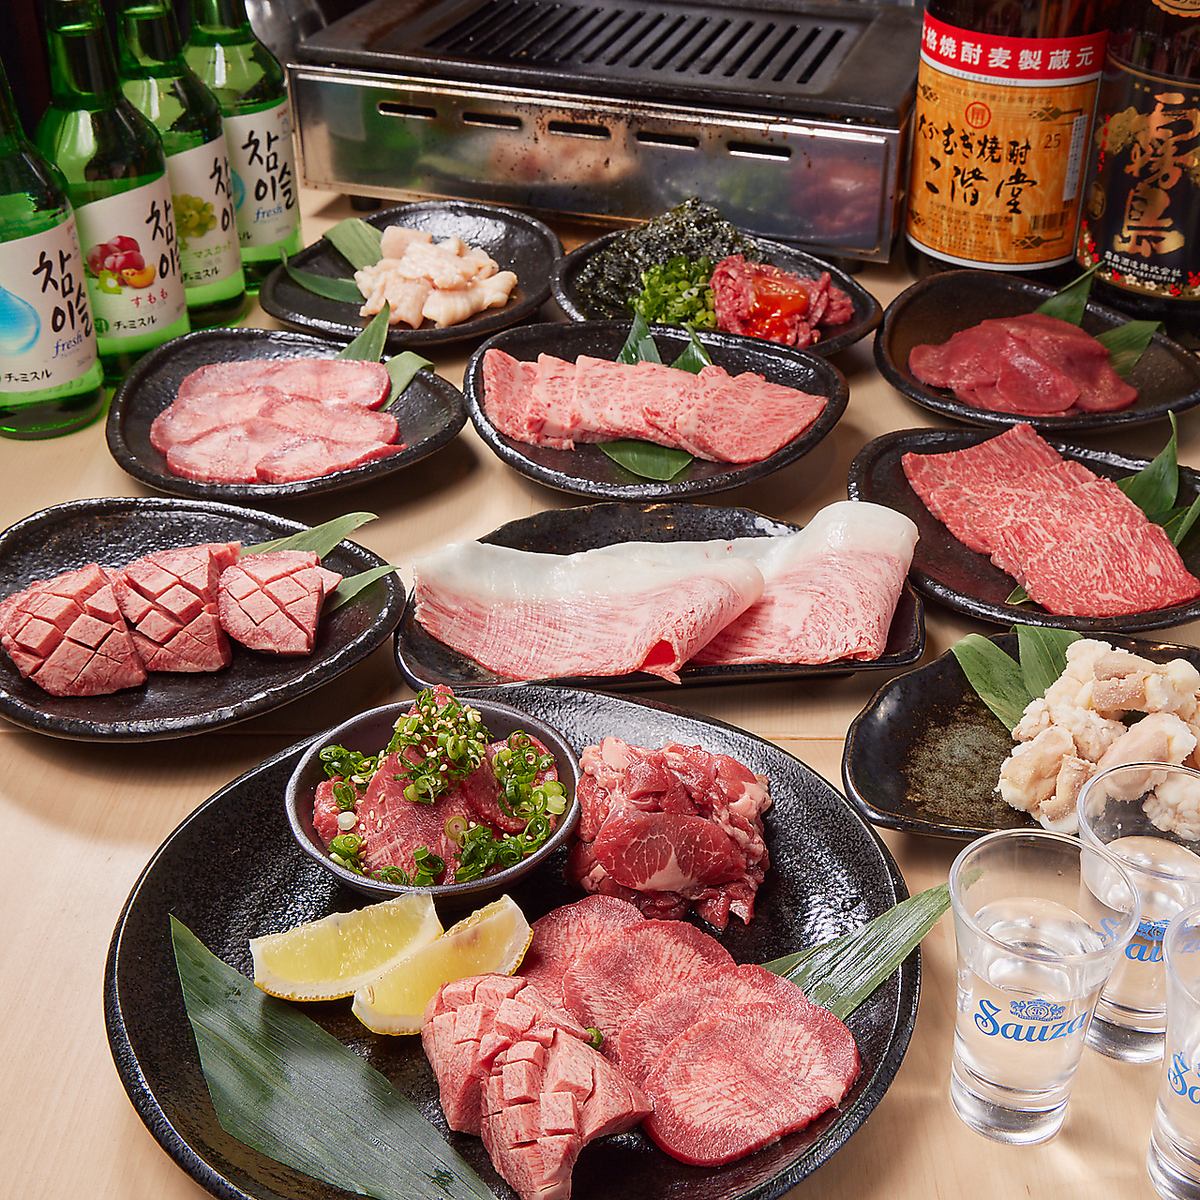 Perfect for a Yakiniku date ◎ Conversation is lively in a casual space ♪